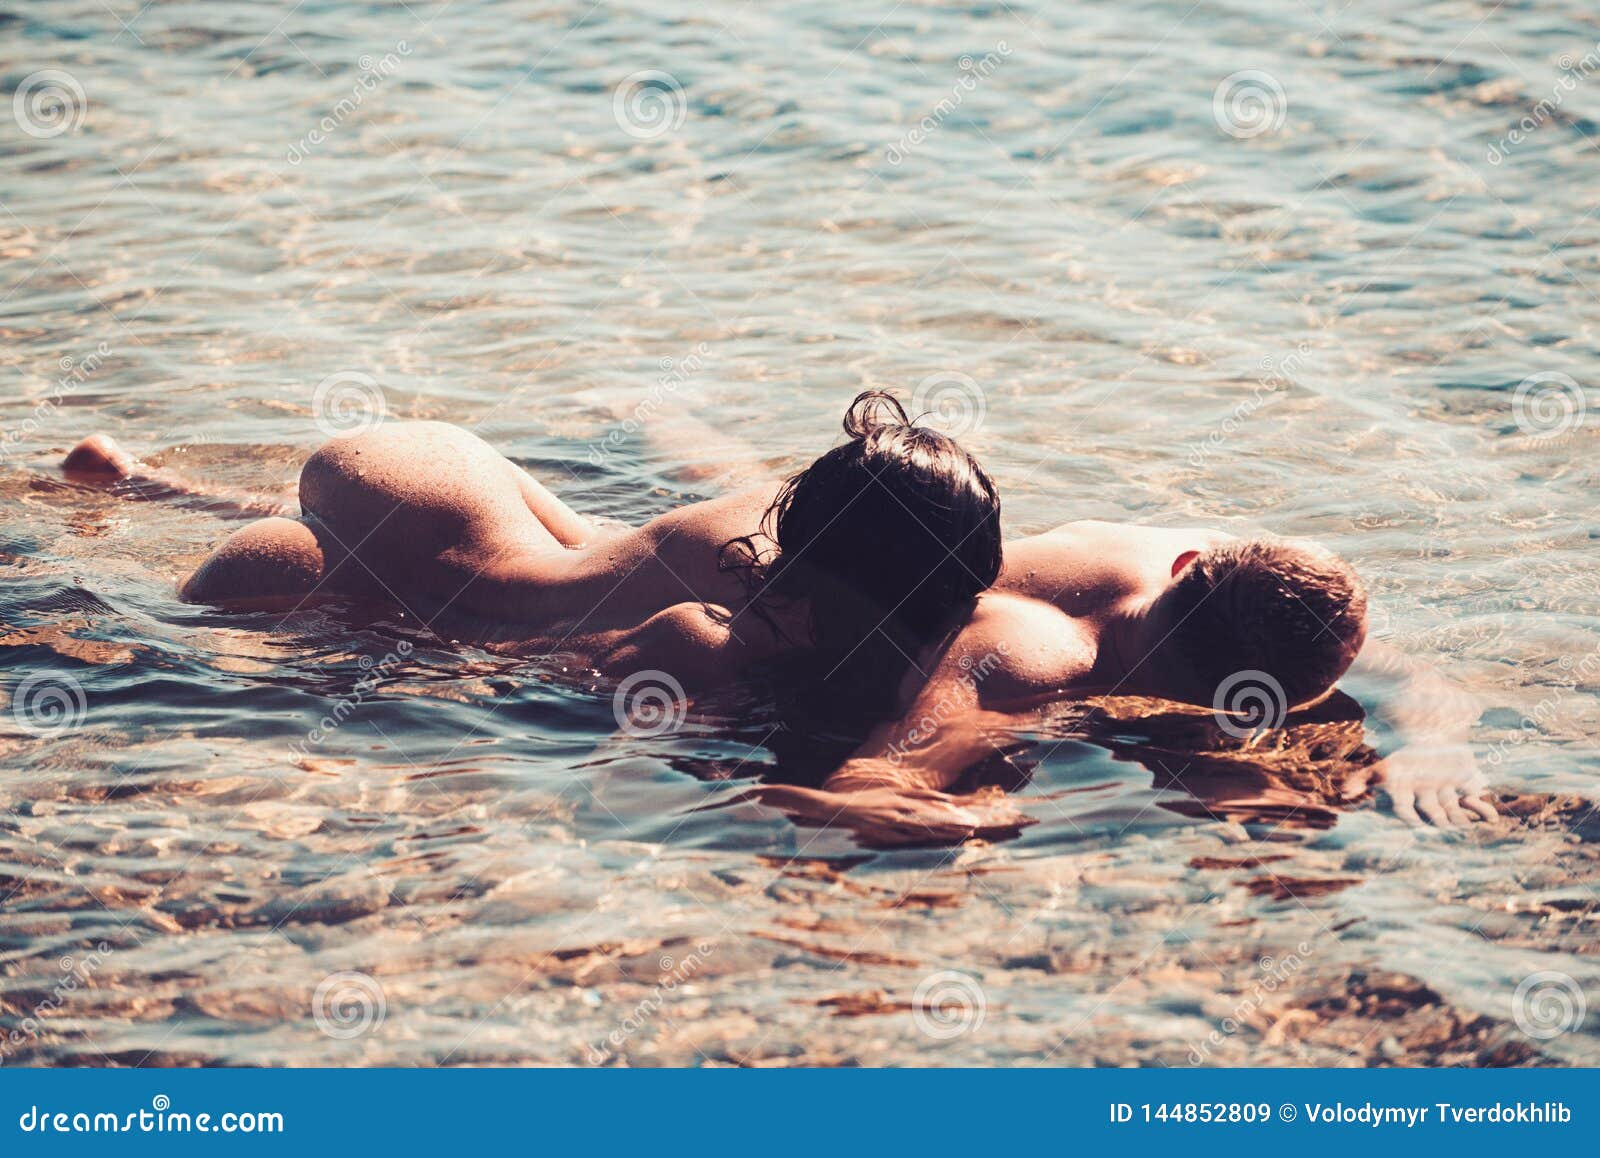 Best of Couple making love on the beach